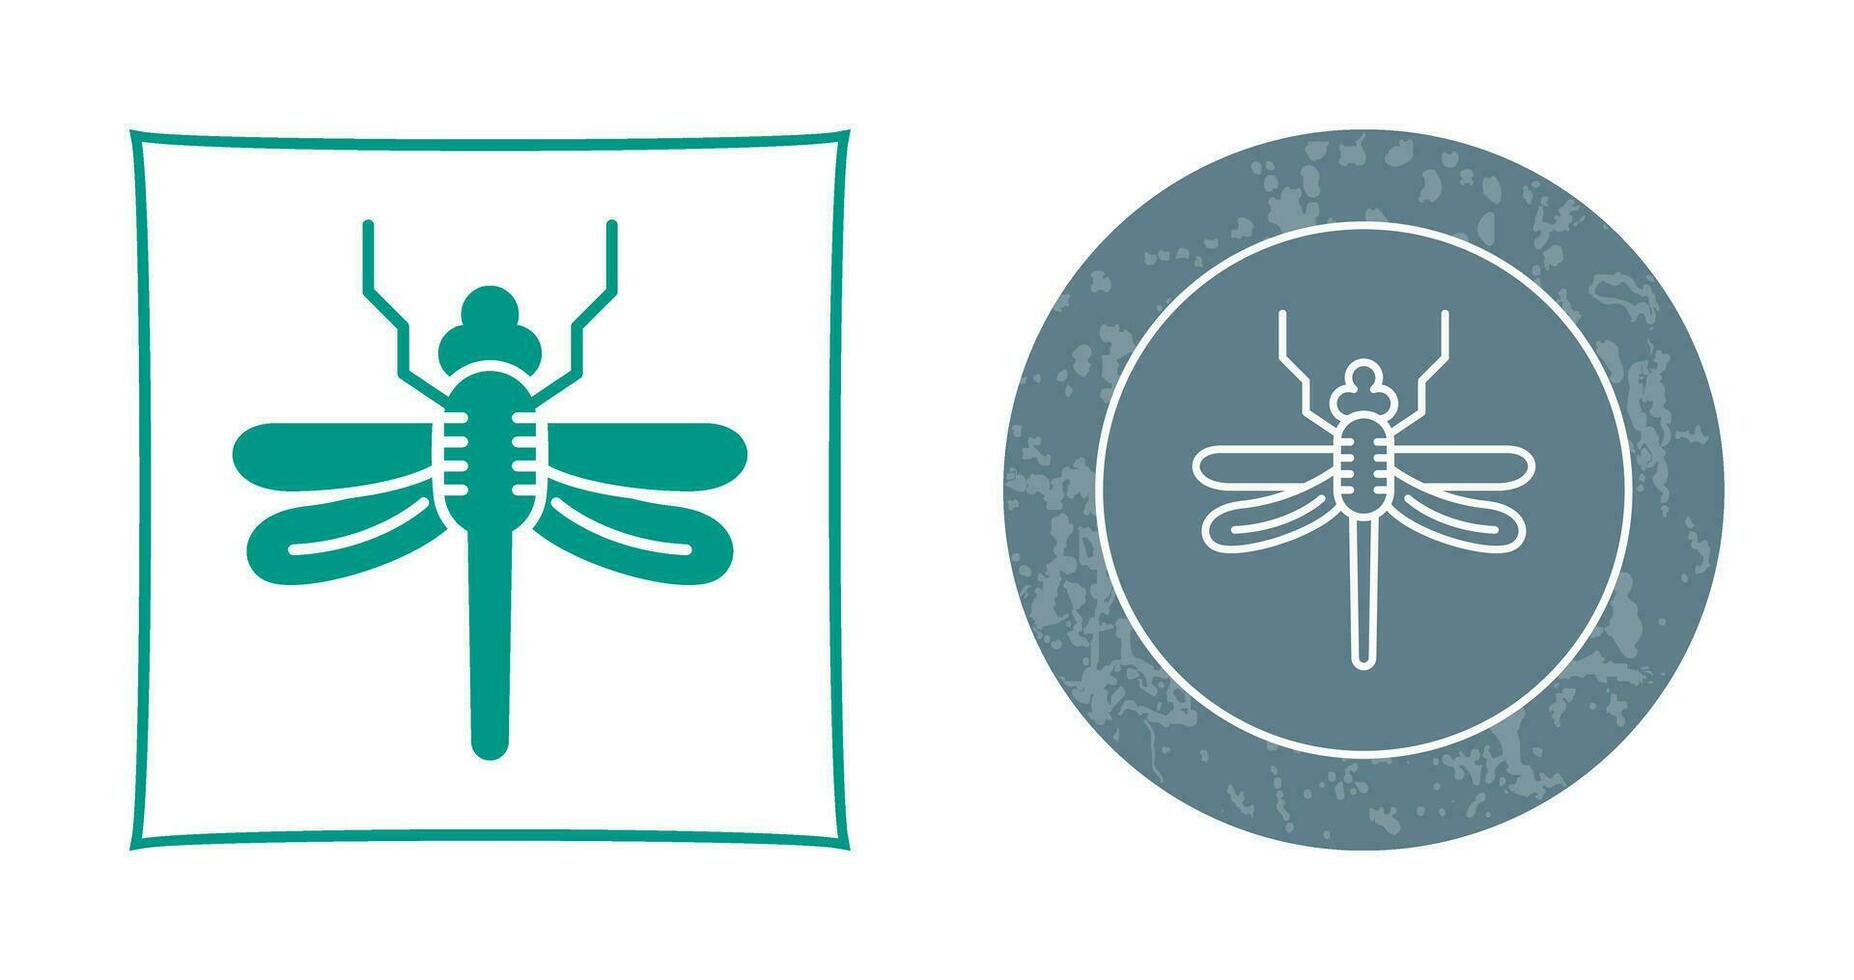 Dragonfly Vector Icon